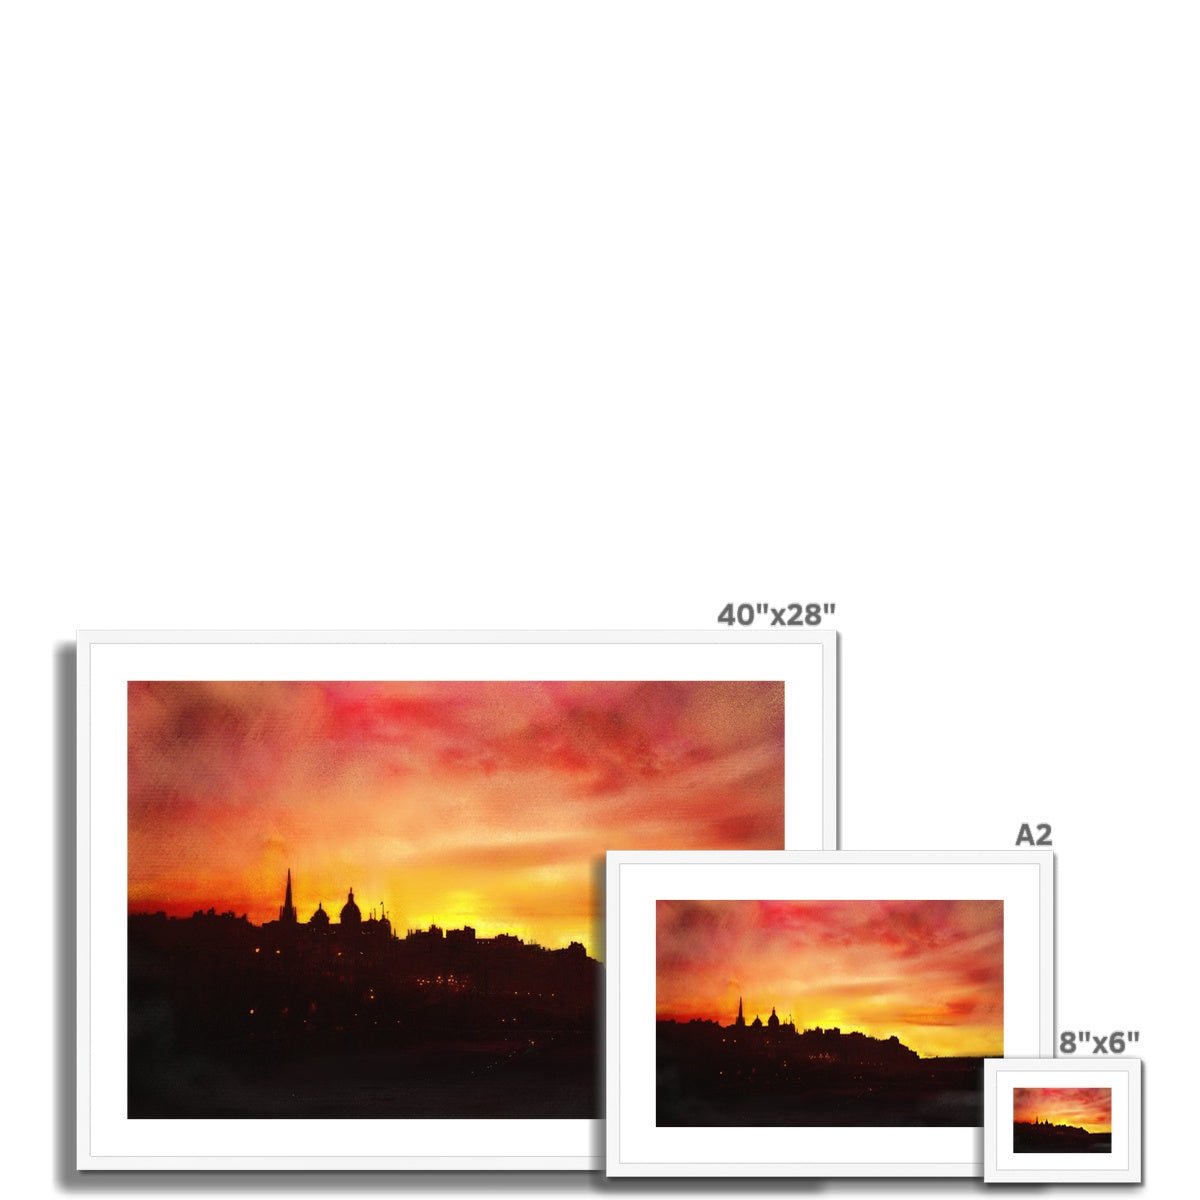 Edinburgh Sunset Painting | Framed & Mounted Prints From Scotland-Framed & Mounted Prints-Edinburgh & Glasgow Art Gallery-Paintings, Prints, Homeware, Art Gifts From Scotland By Scottish Artist Kevin Hunter